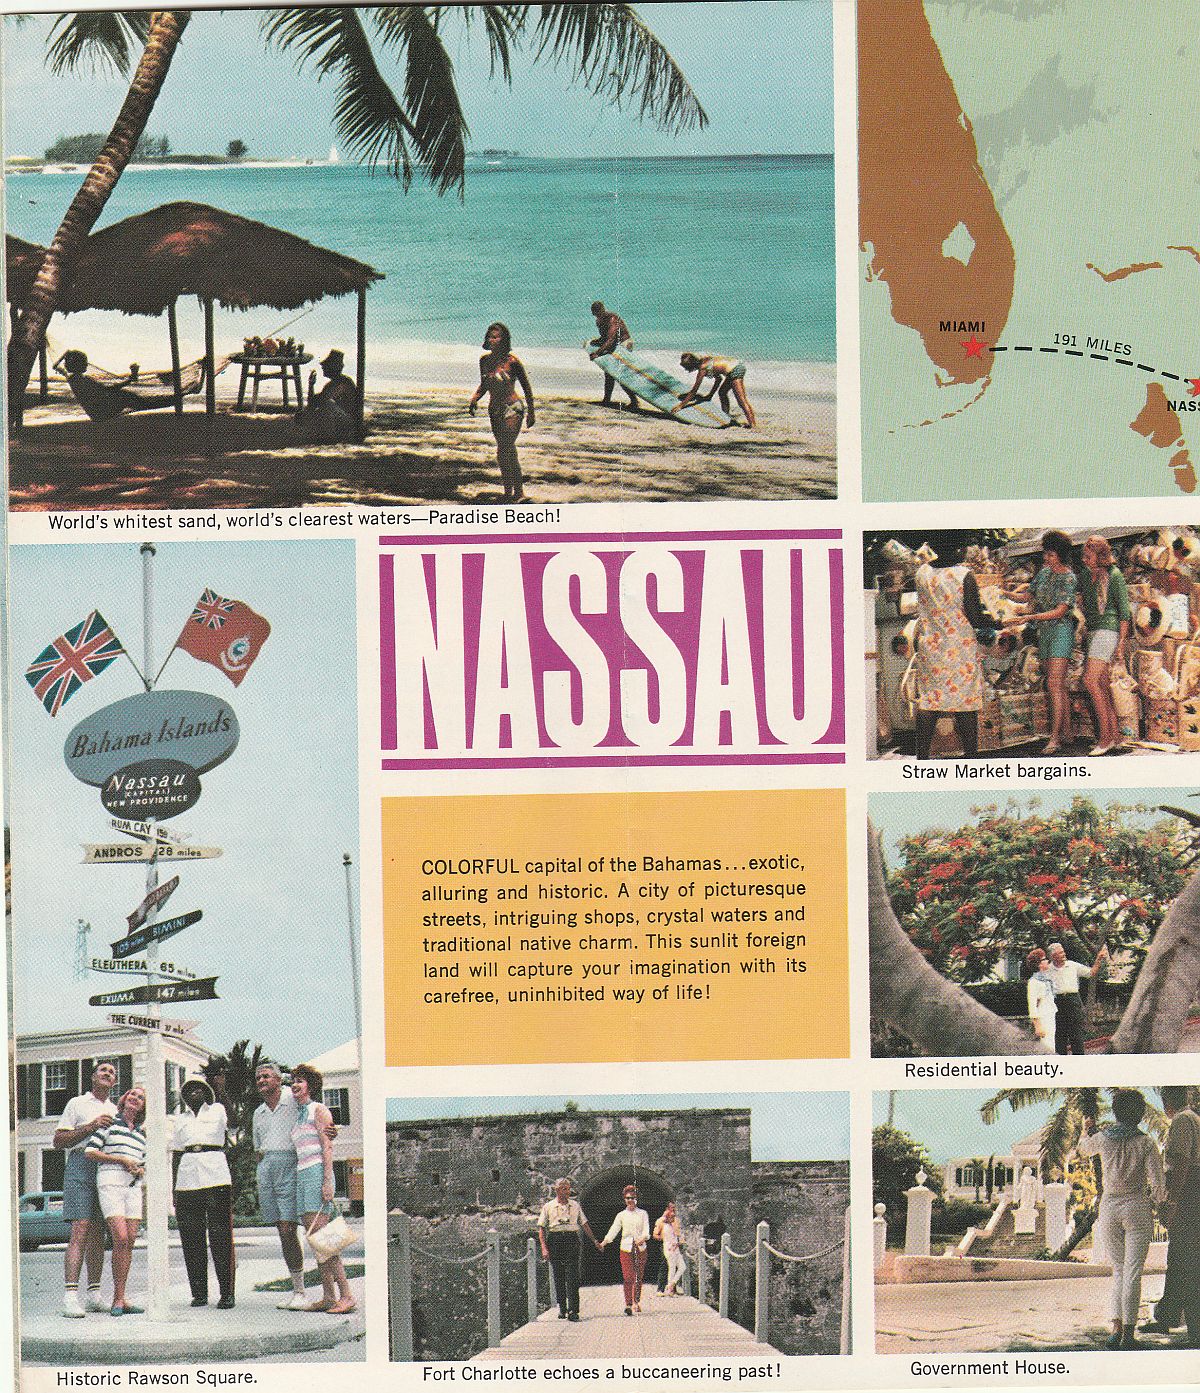 ss Florida About Nassau: Colorful capital of the Bahamas - exotic, alluring and historic.